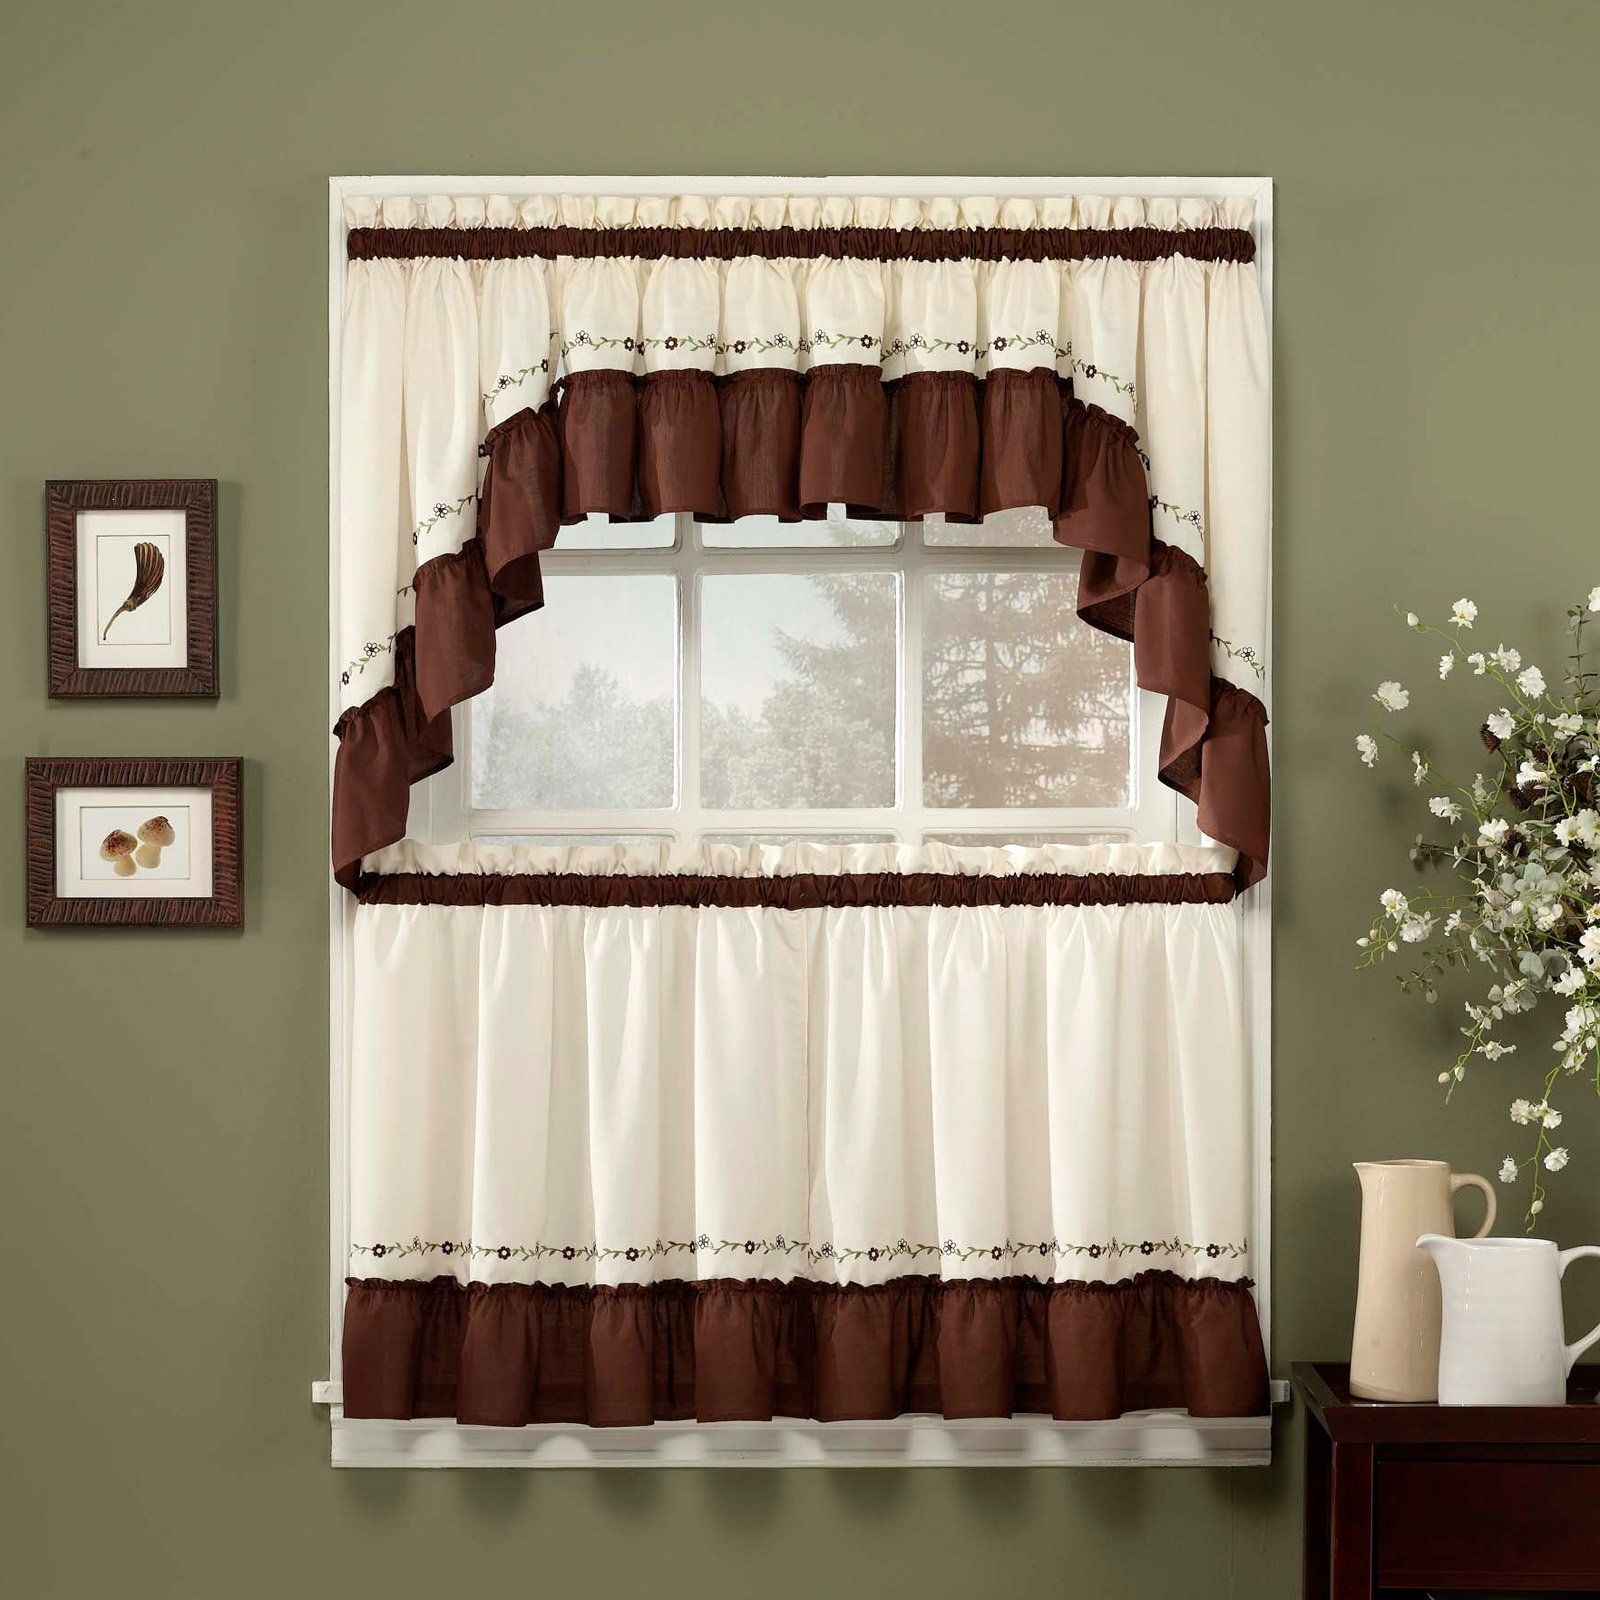 Cotton Lace 5 Piece Window Tier And Swag Sets With Regard To Most Up To Date Chf Industries Jayden Window Swag – One Pair Chocolate In (View 3 of 20)